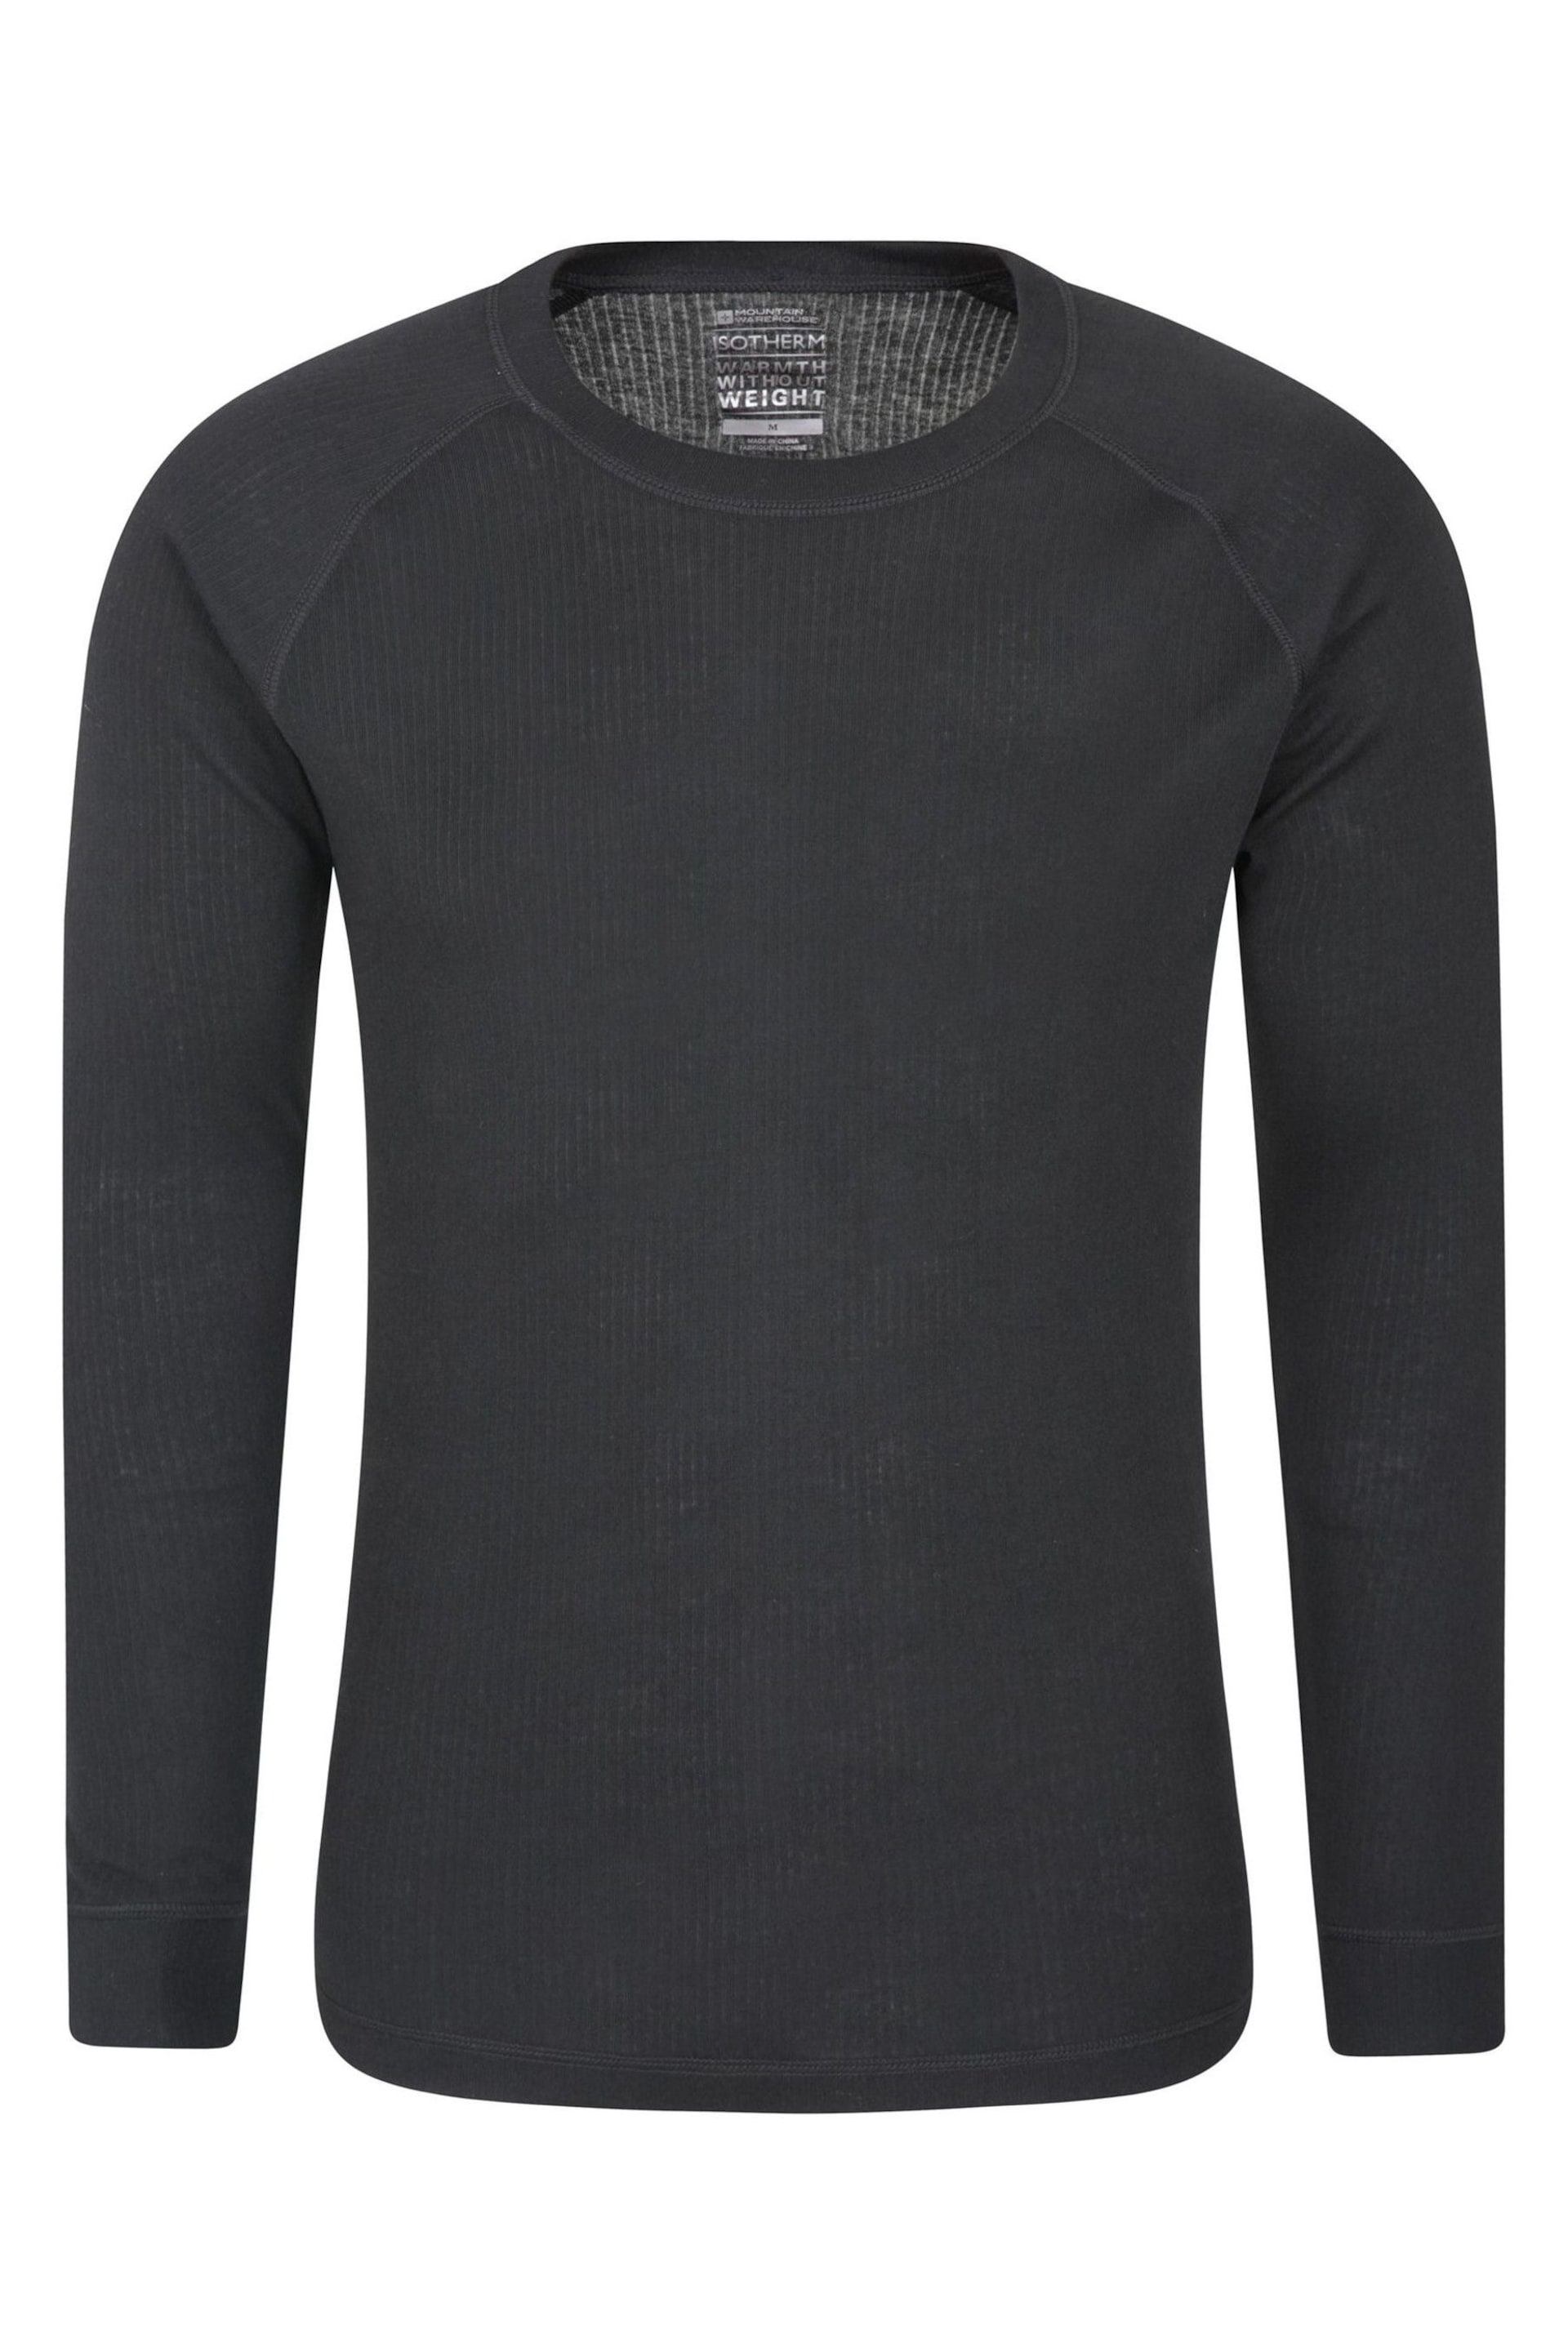 Mountain Warehouse Black Talus Mens Long Sleeved Thermal Top - Image 1 of 5